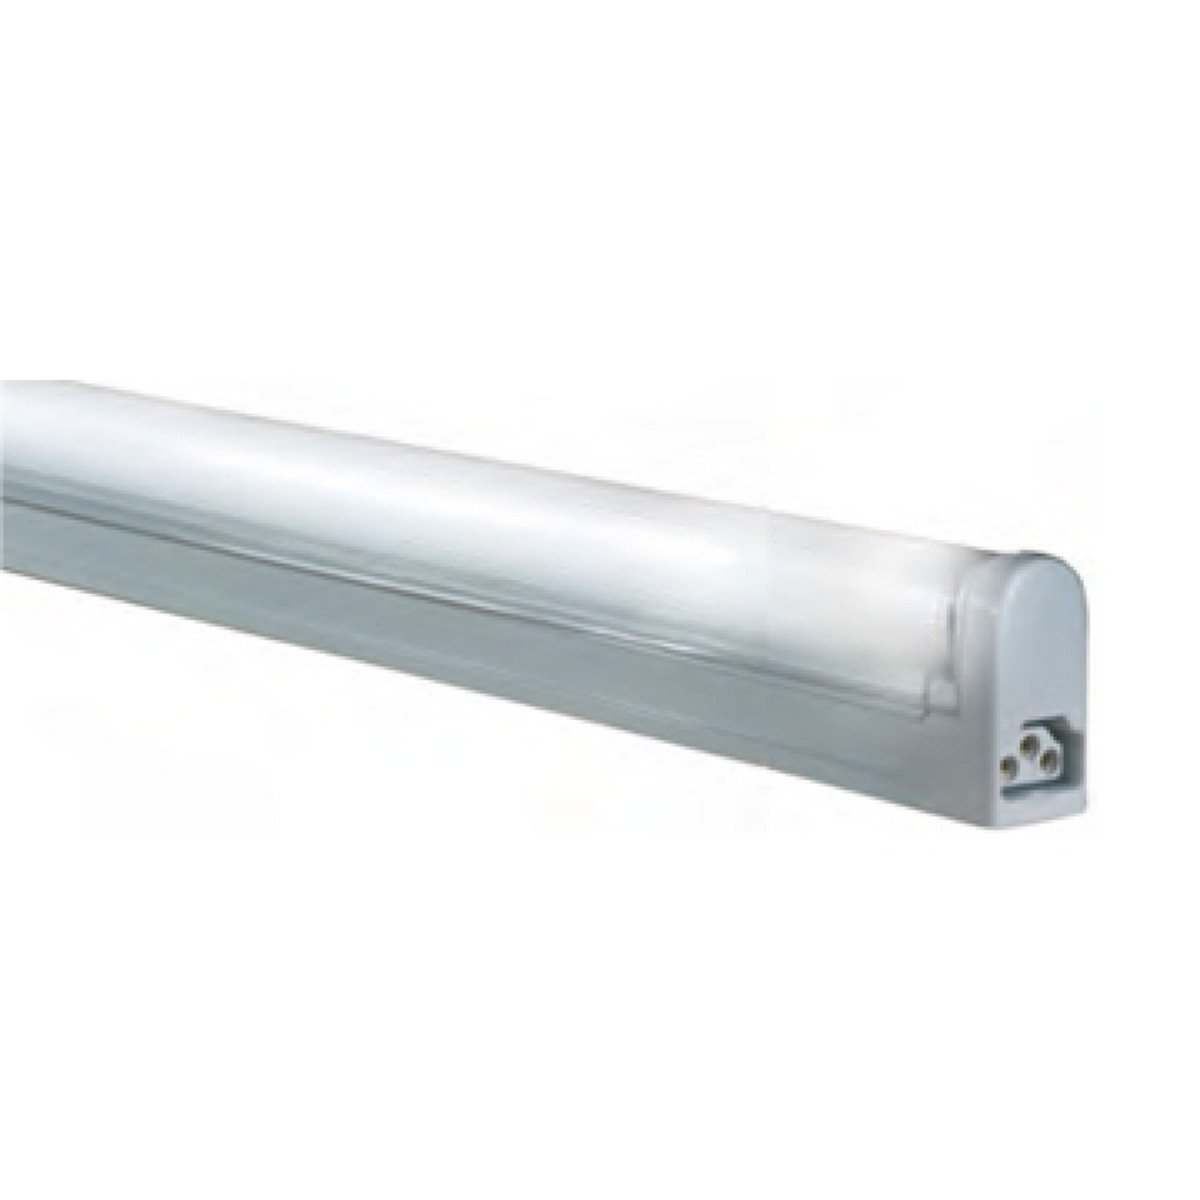 Picture of Jesco Lighting SG4-16SW-64-W T4 Sleek Plus Fluorescent Undercabinet Fixture with Rocker Switch - White